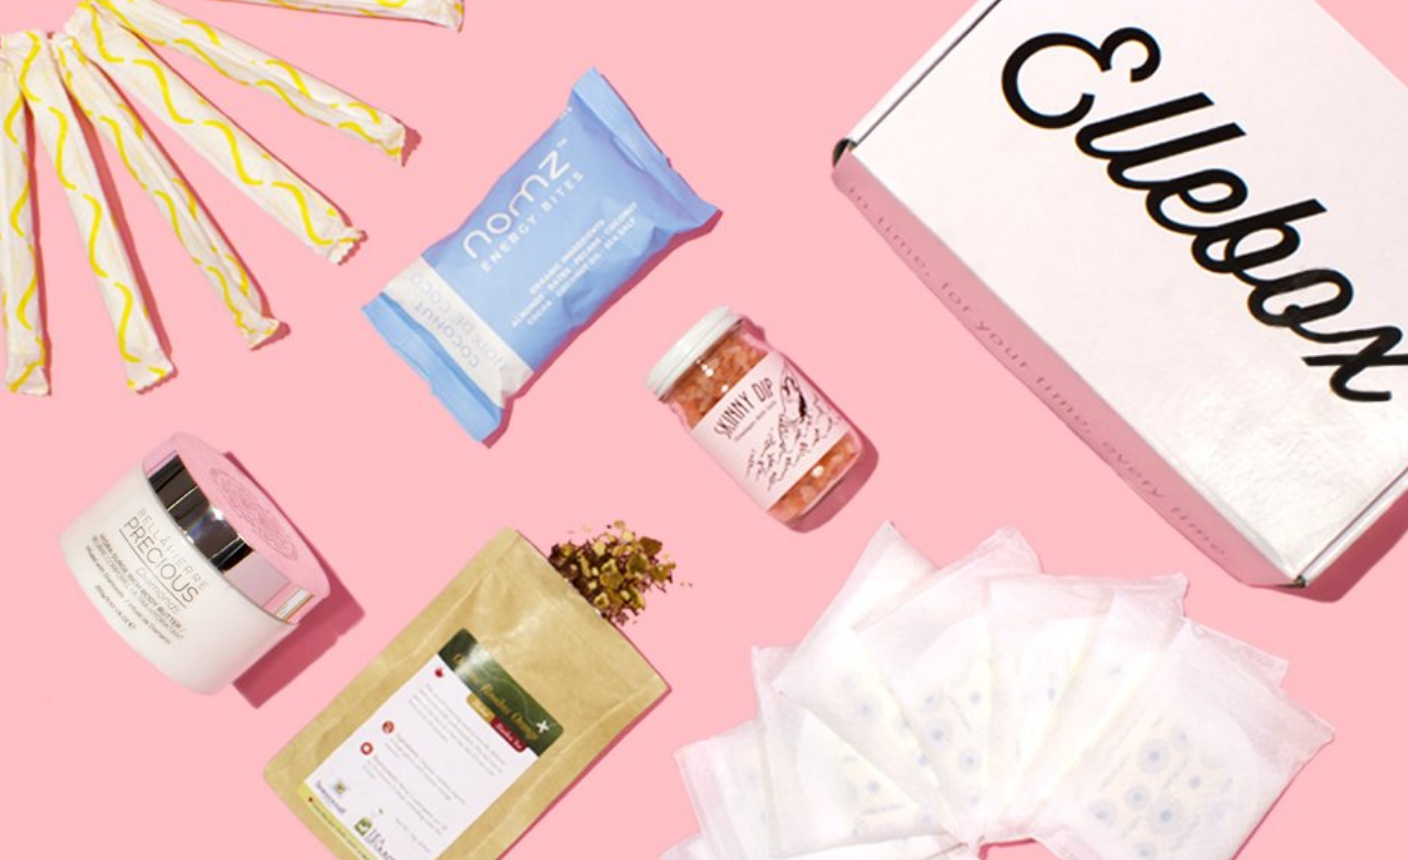 Join the world of monthly subscription boxes with this list of monthly subscription boxes.